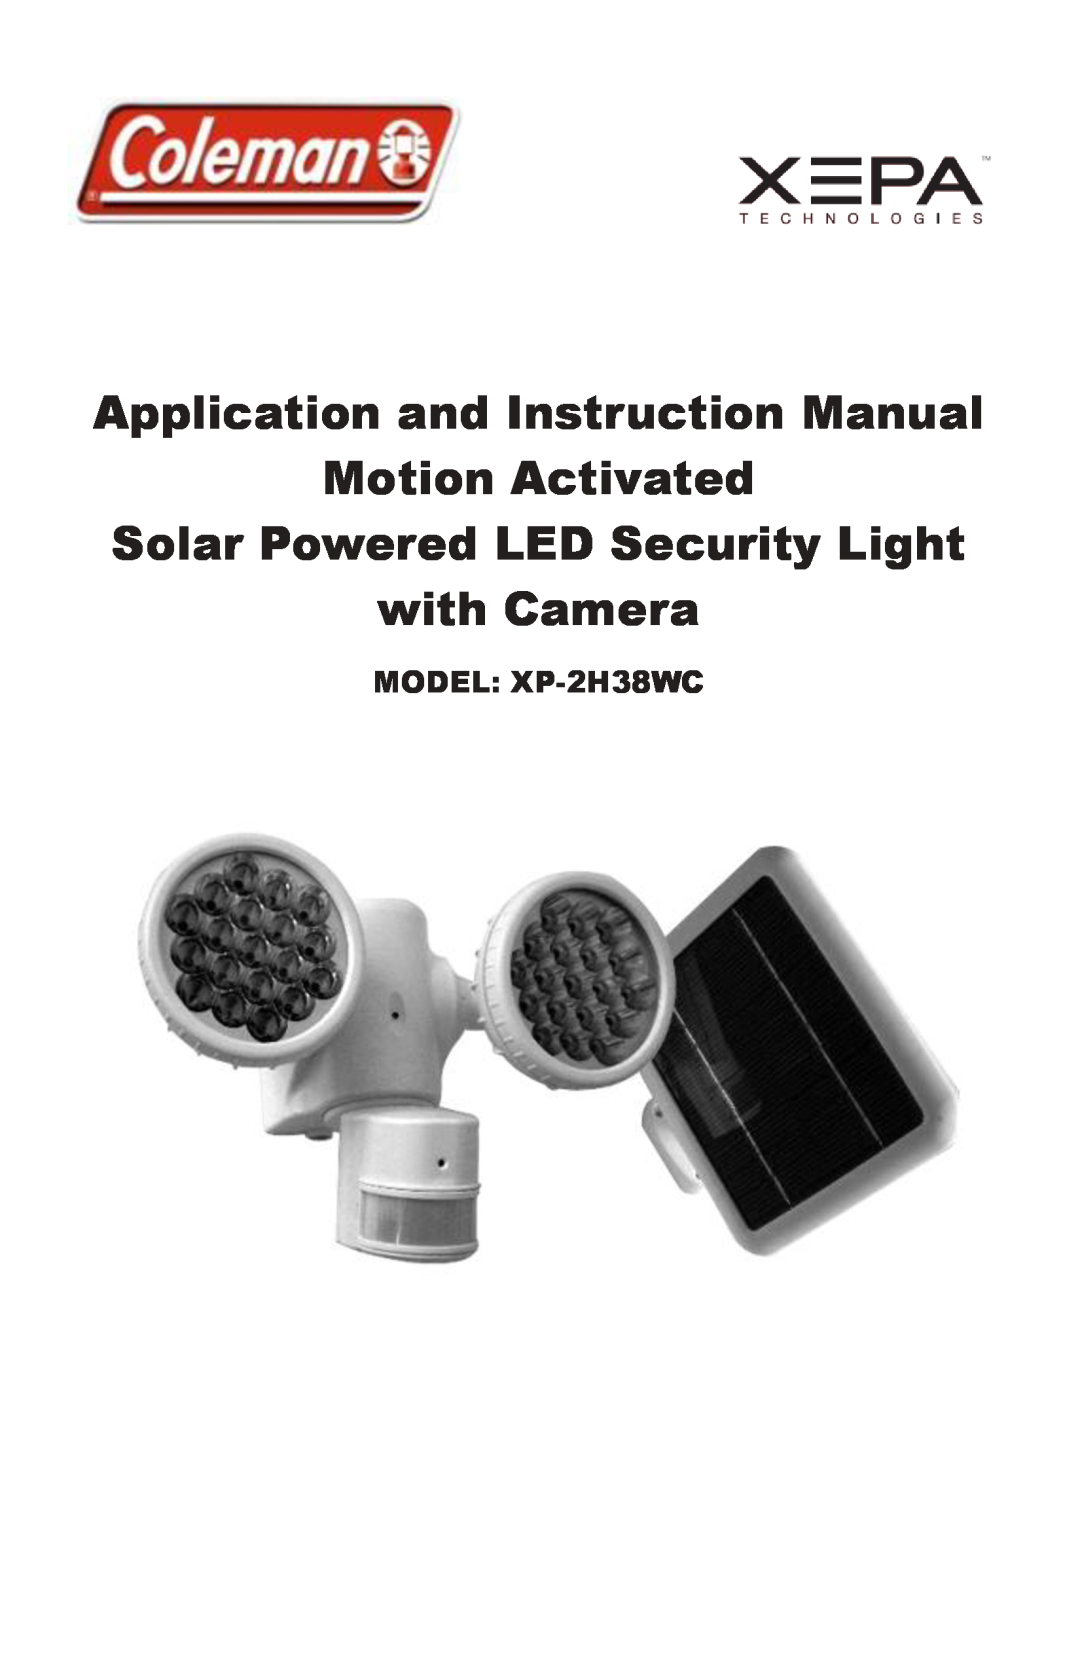 Coleman instruction manual Solar Powered LED Security Light with Camera, MODEL XP-2H38WC 